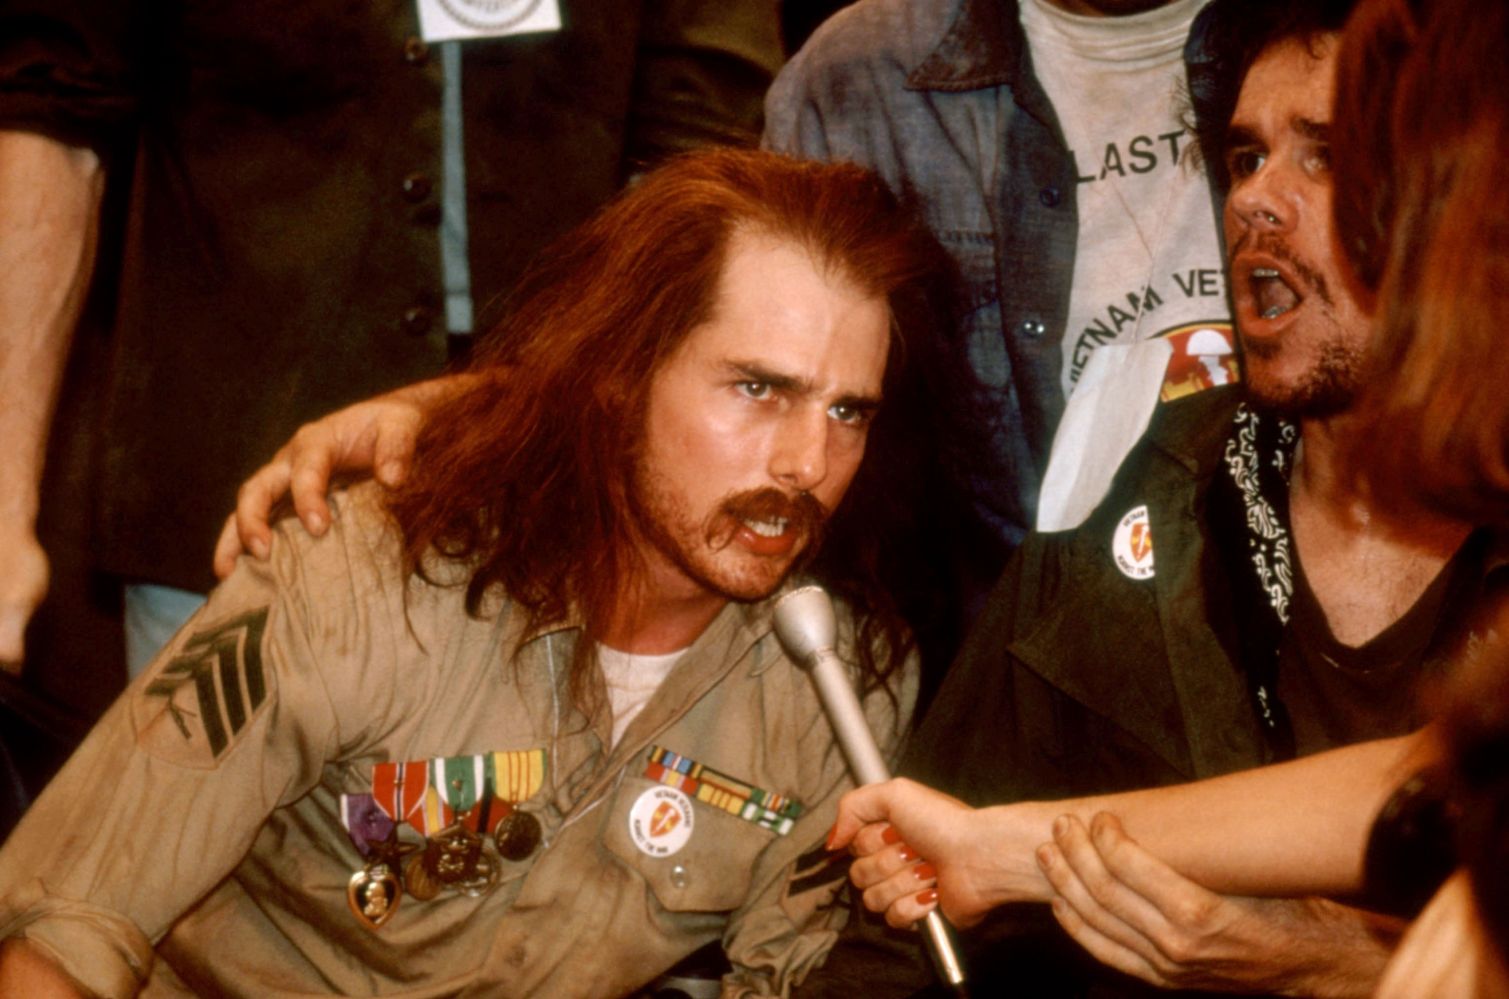 <p>Tom Cruise’s Oscar-nominated role as disabled Vietnam veteran-turned-activist Ron Kovic is still remembered as one of the best pure acting performances of the movie star’s career. Oliver Stone’s political biopic was seen by many as a continuation of the antiwar themes he began exploring in ‘Platoon,’ and remains a high point of his divisive career. As Cruise continues to drop hints about eventually pivoting towards more serious roles when his blockbuster career winds down, ‘Born on the Fourth of July’ is a great reminder of what he’s capable of.</p>